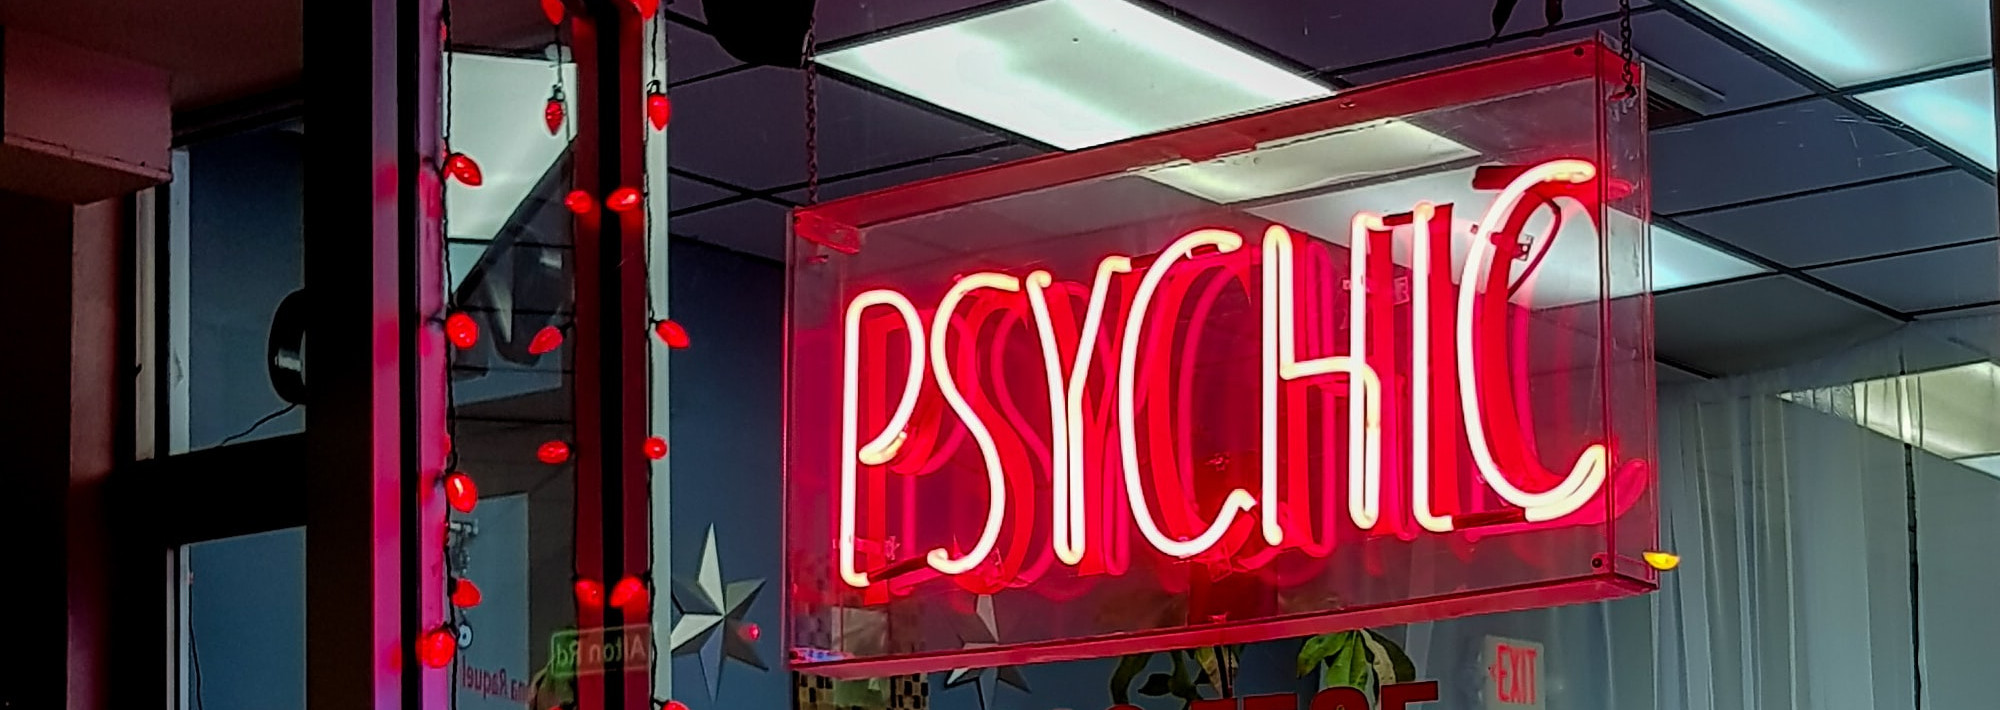 A red neon window sign with the word "Psychic"